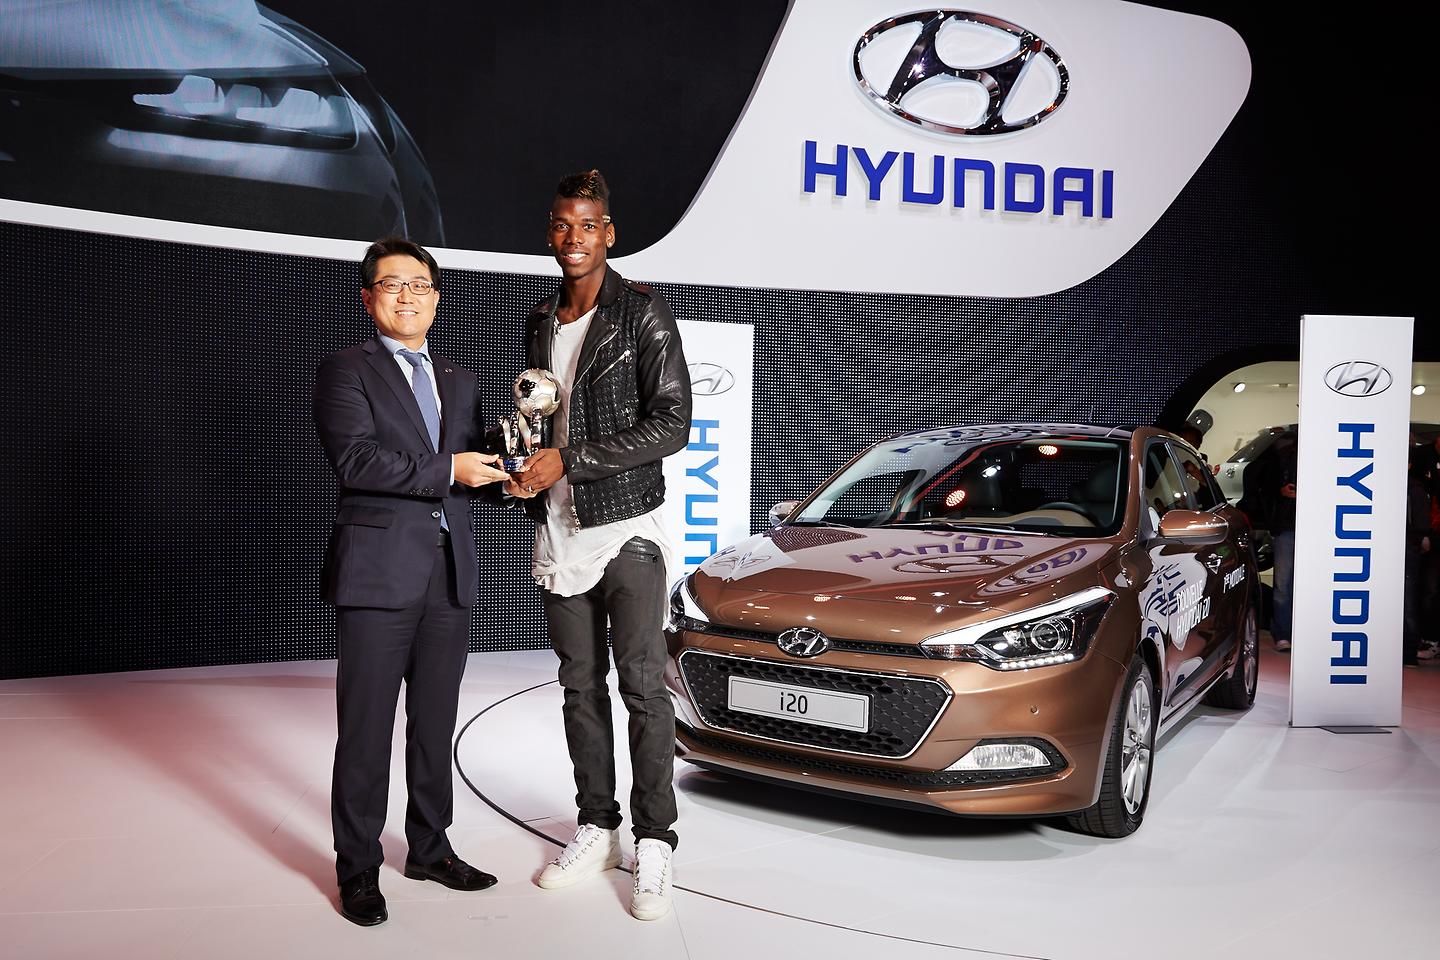 French Football Star Pogba Receives the ‘Hyundai Young Player Award’ in Paris